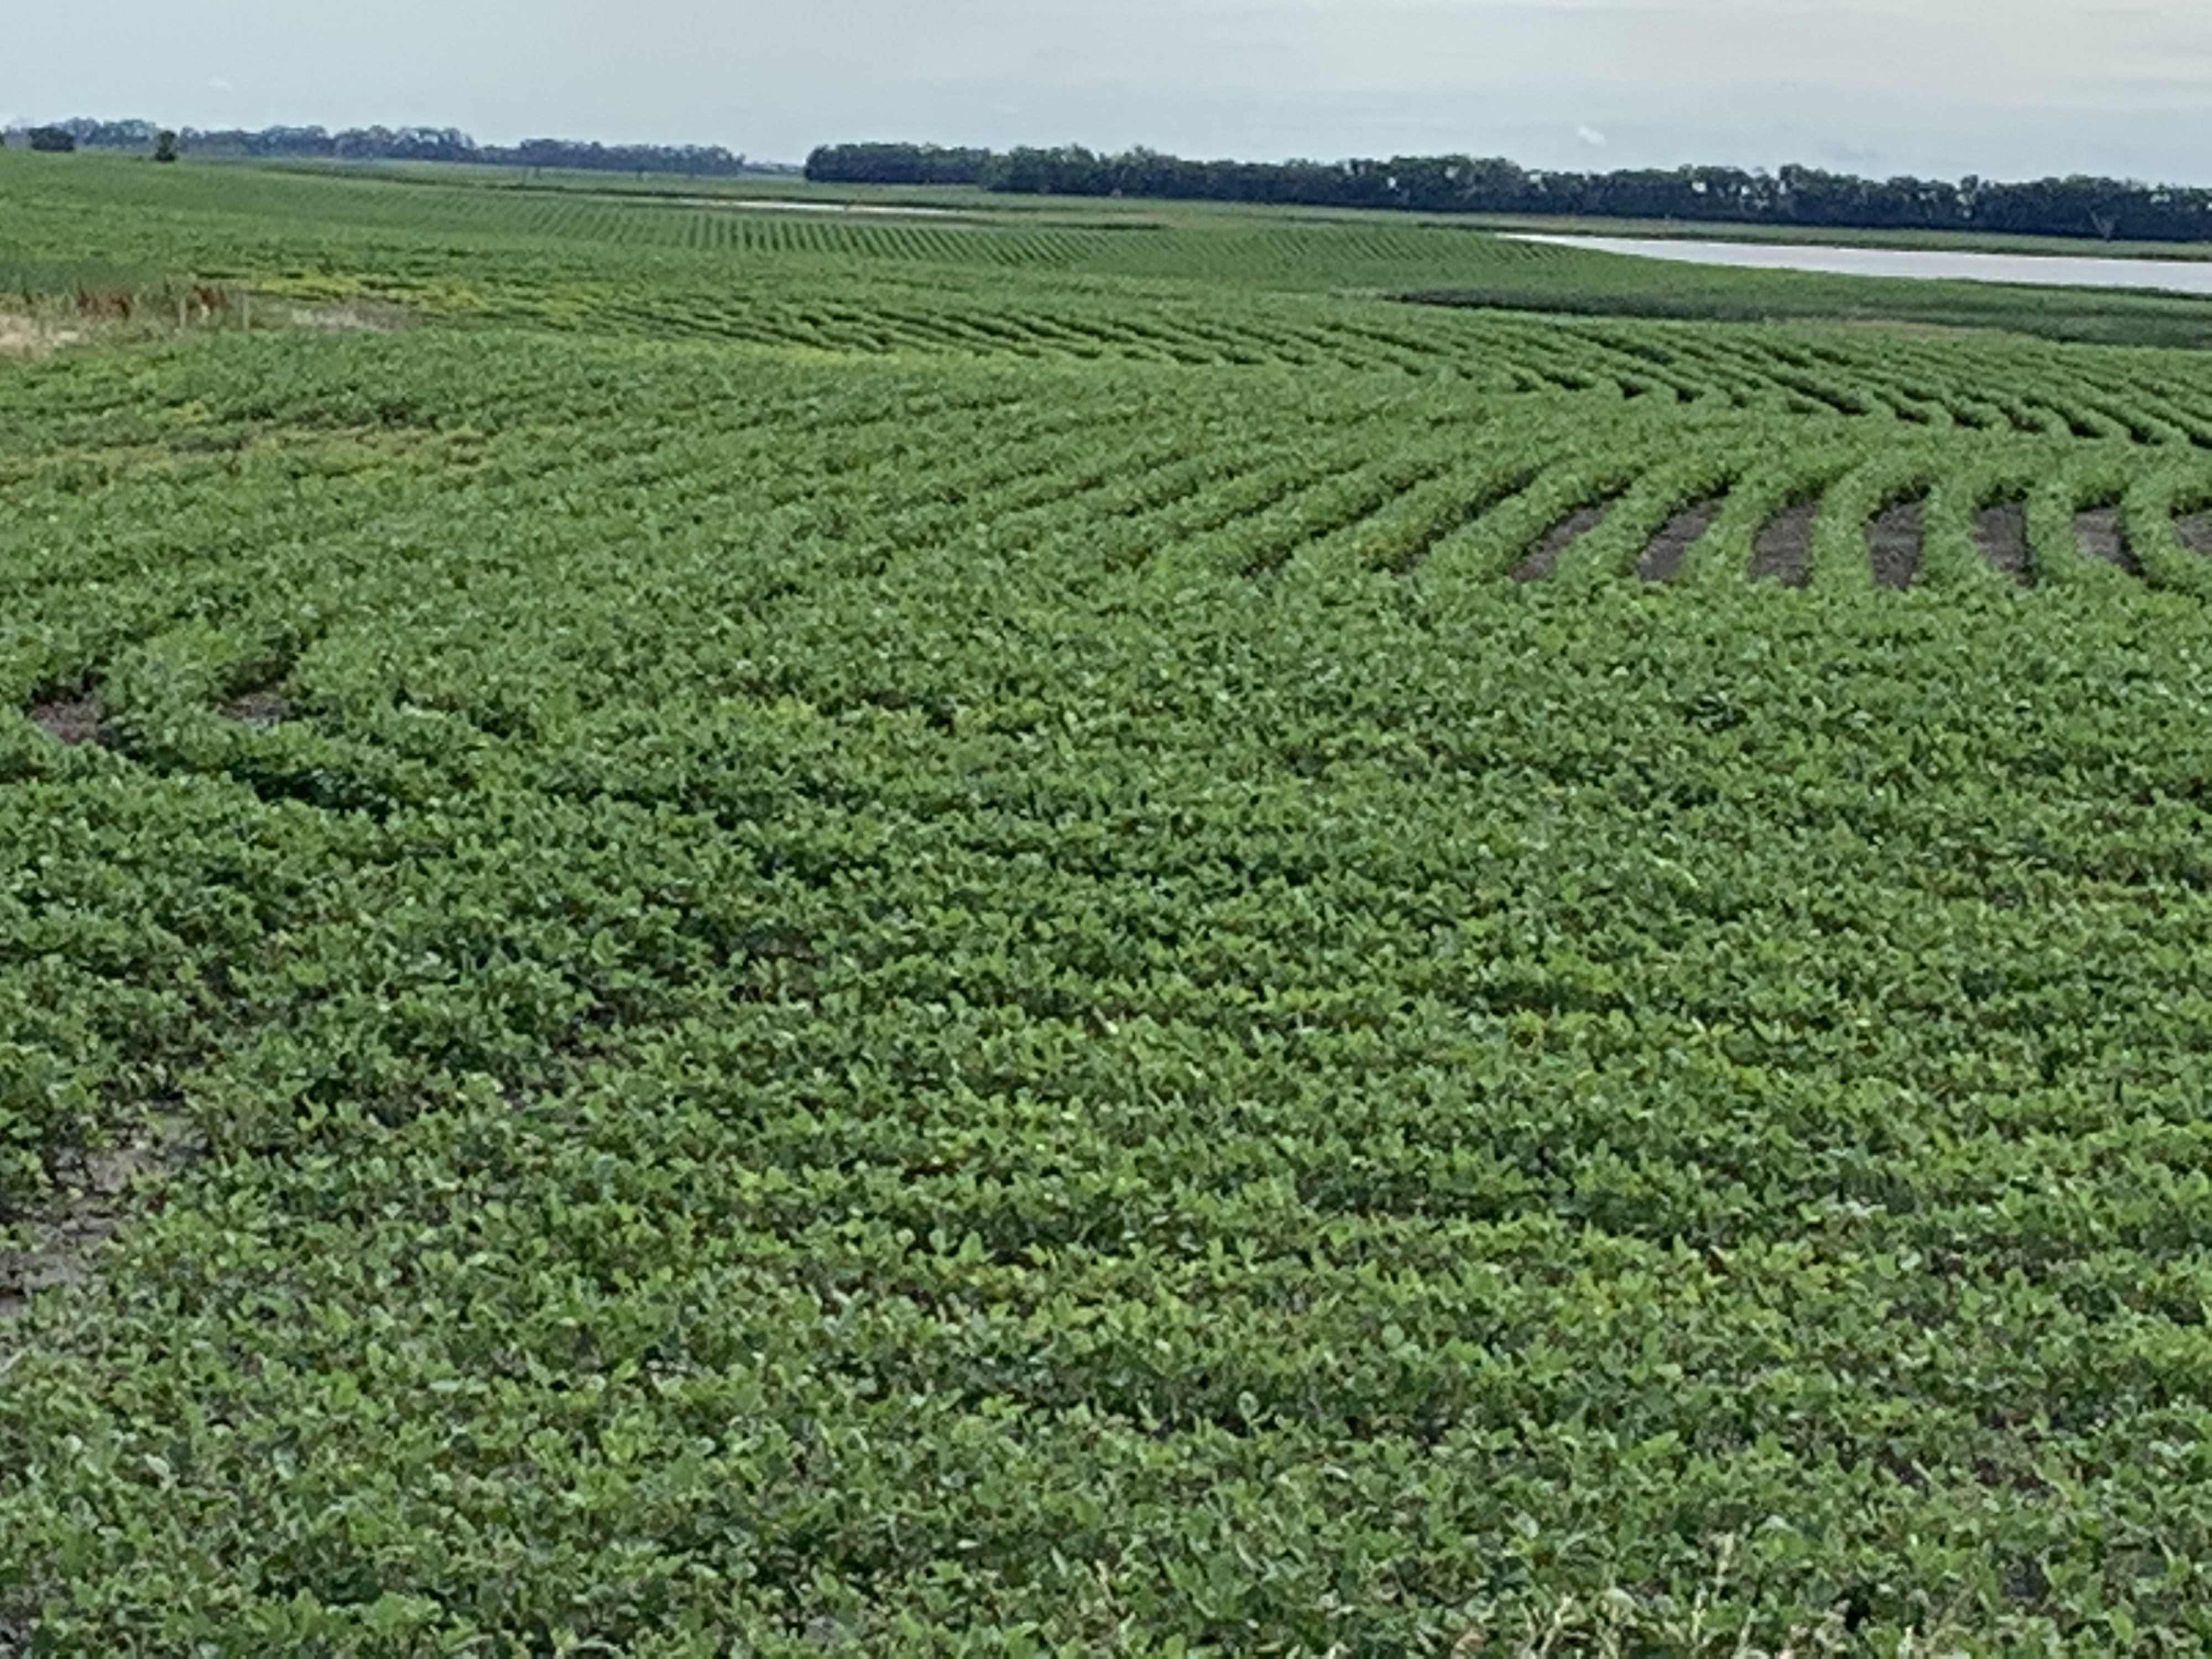 Mid-morning Ag News, July 23, 2021: Using electricity to control weeds